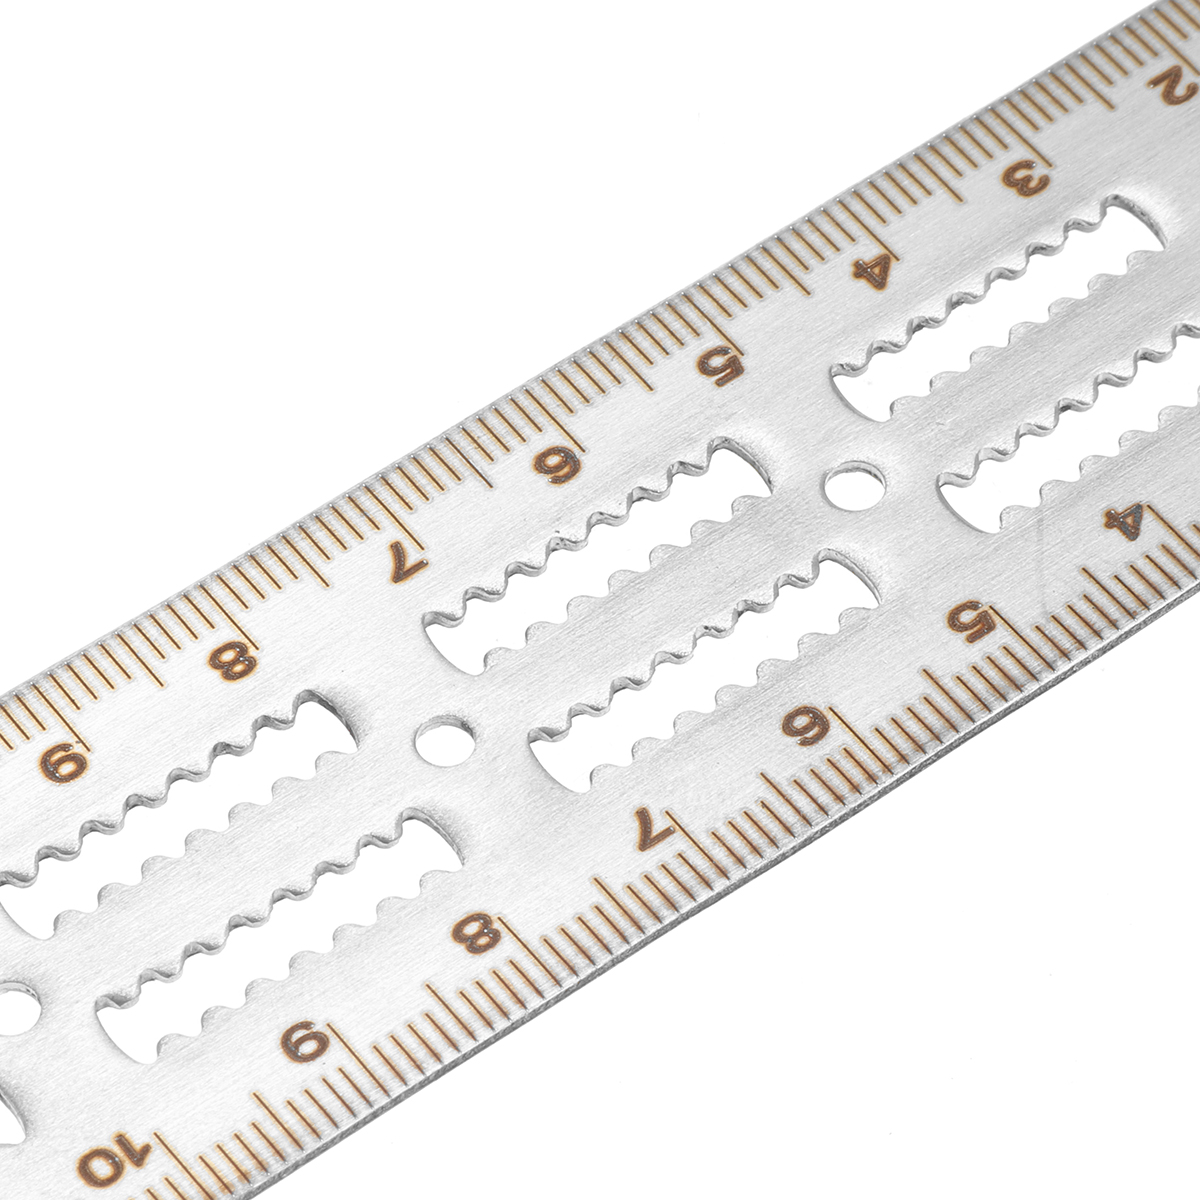 Stainless-Steel-Edge-Ruler-Protractor-Woodworking-Ruler-Angle-Measuring-Tool-Precision-Carpenter-Too-1923789-12